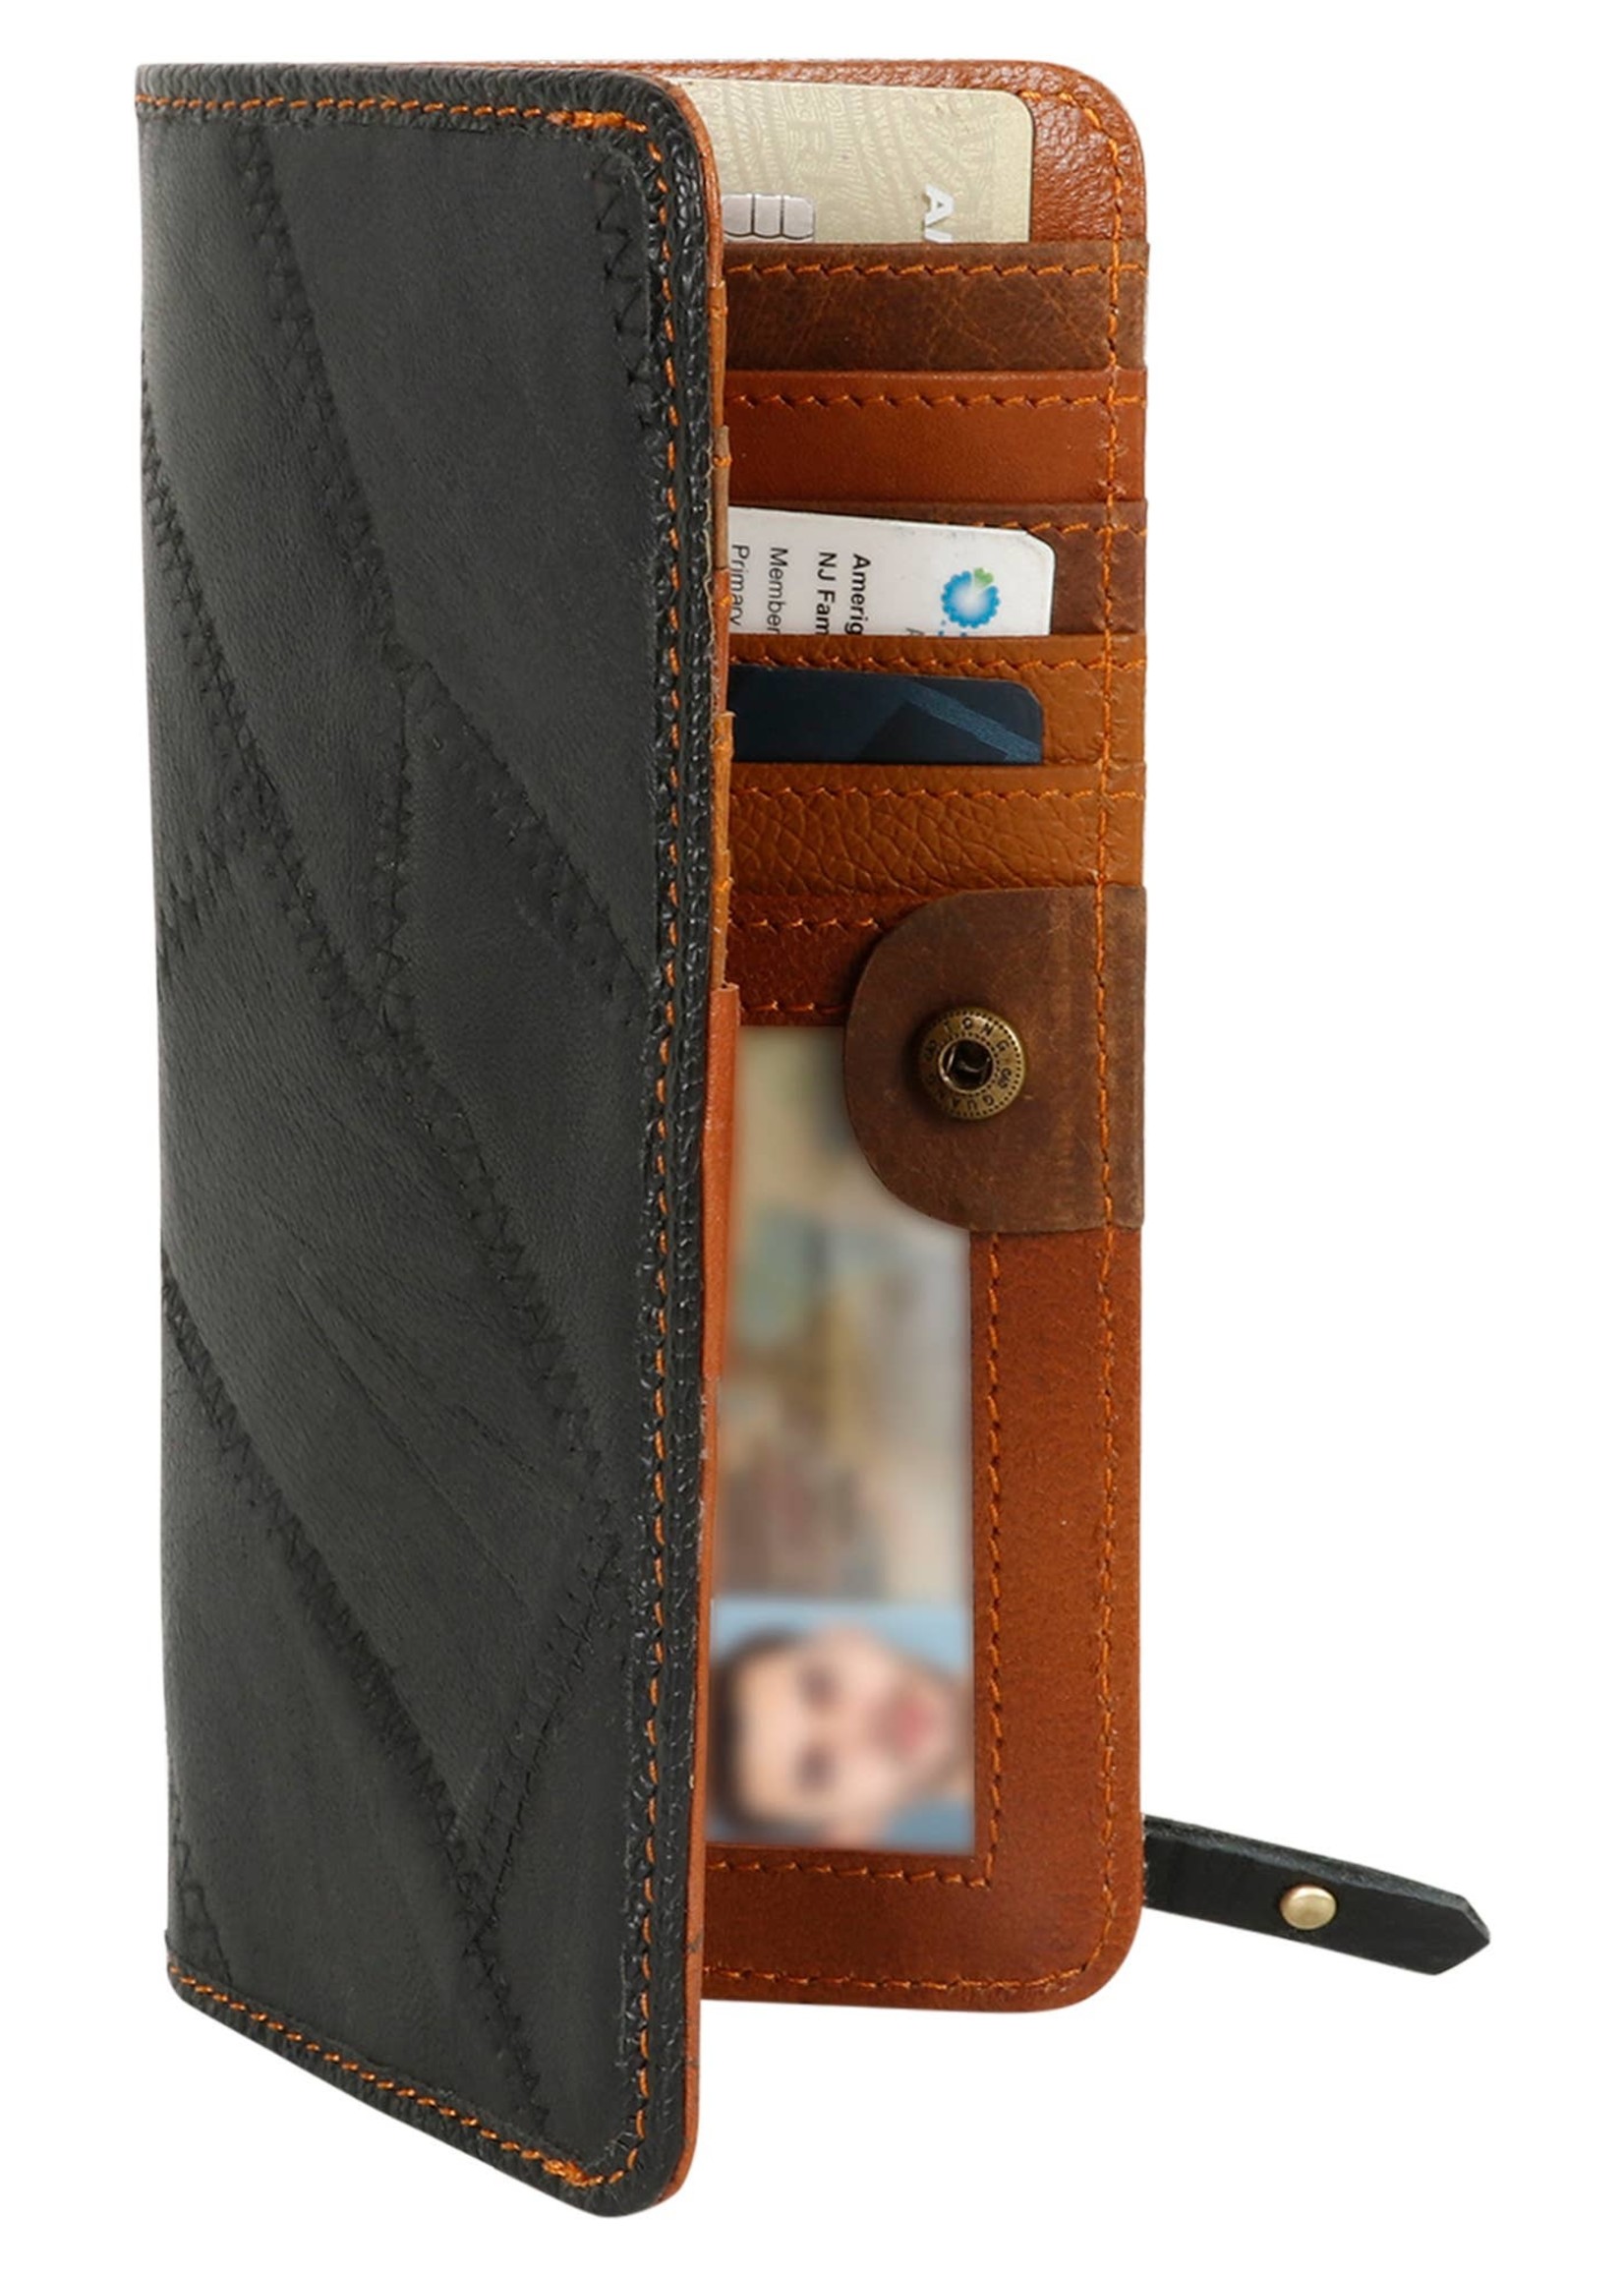 Spencer Wallet, Upcycled Genuine Leather